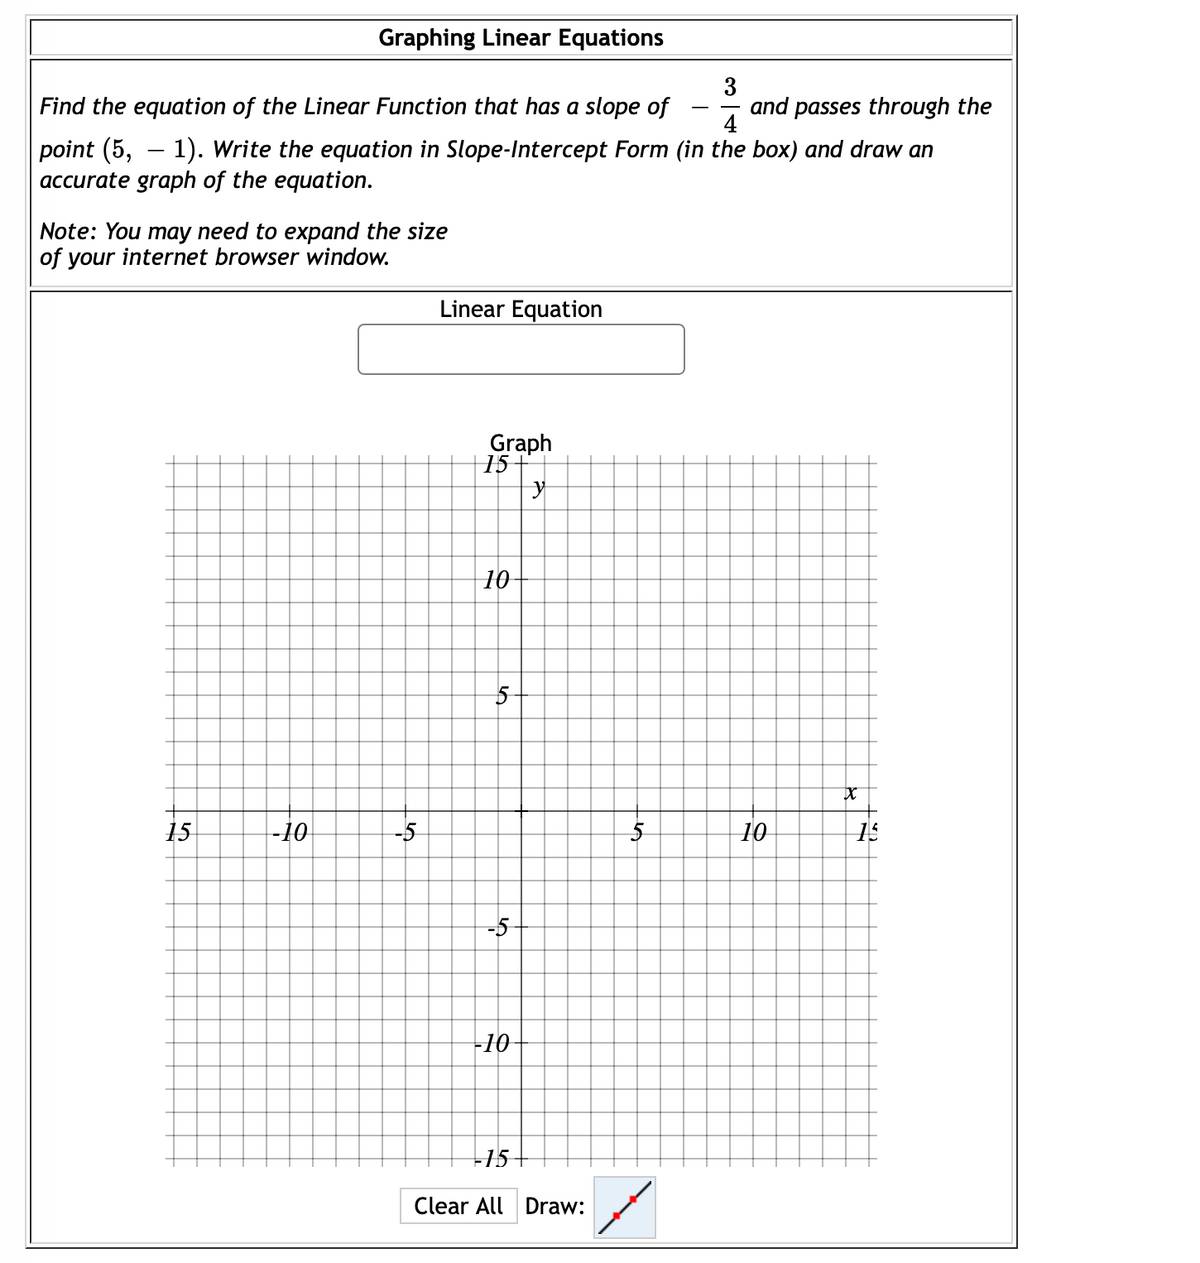 Graphing Linear Equations
3
Find the equation of the Linear Function that has a slope of
and passes through the
4
point (5, – 1). Write the equation in Slope-Intercept Form (in the box) and draw an
accurate graph of the equation.
Note: You may need to expand the size
of your internet browser window.
Linear Equation
Graph
15-
10
15
-10
-5
10
-10
15
Clear All Draw:
